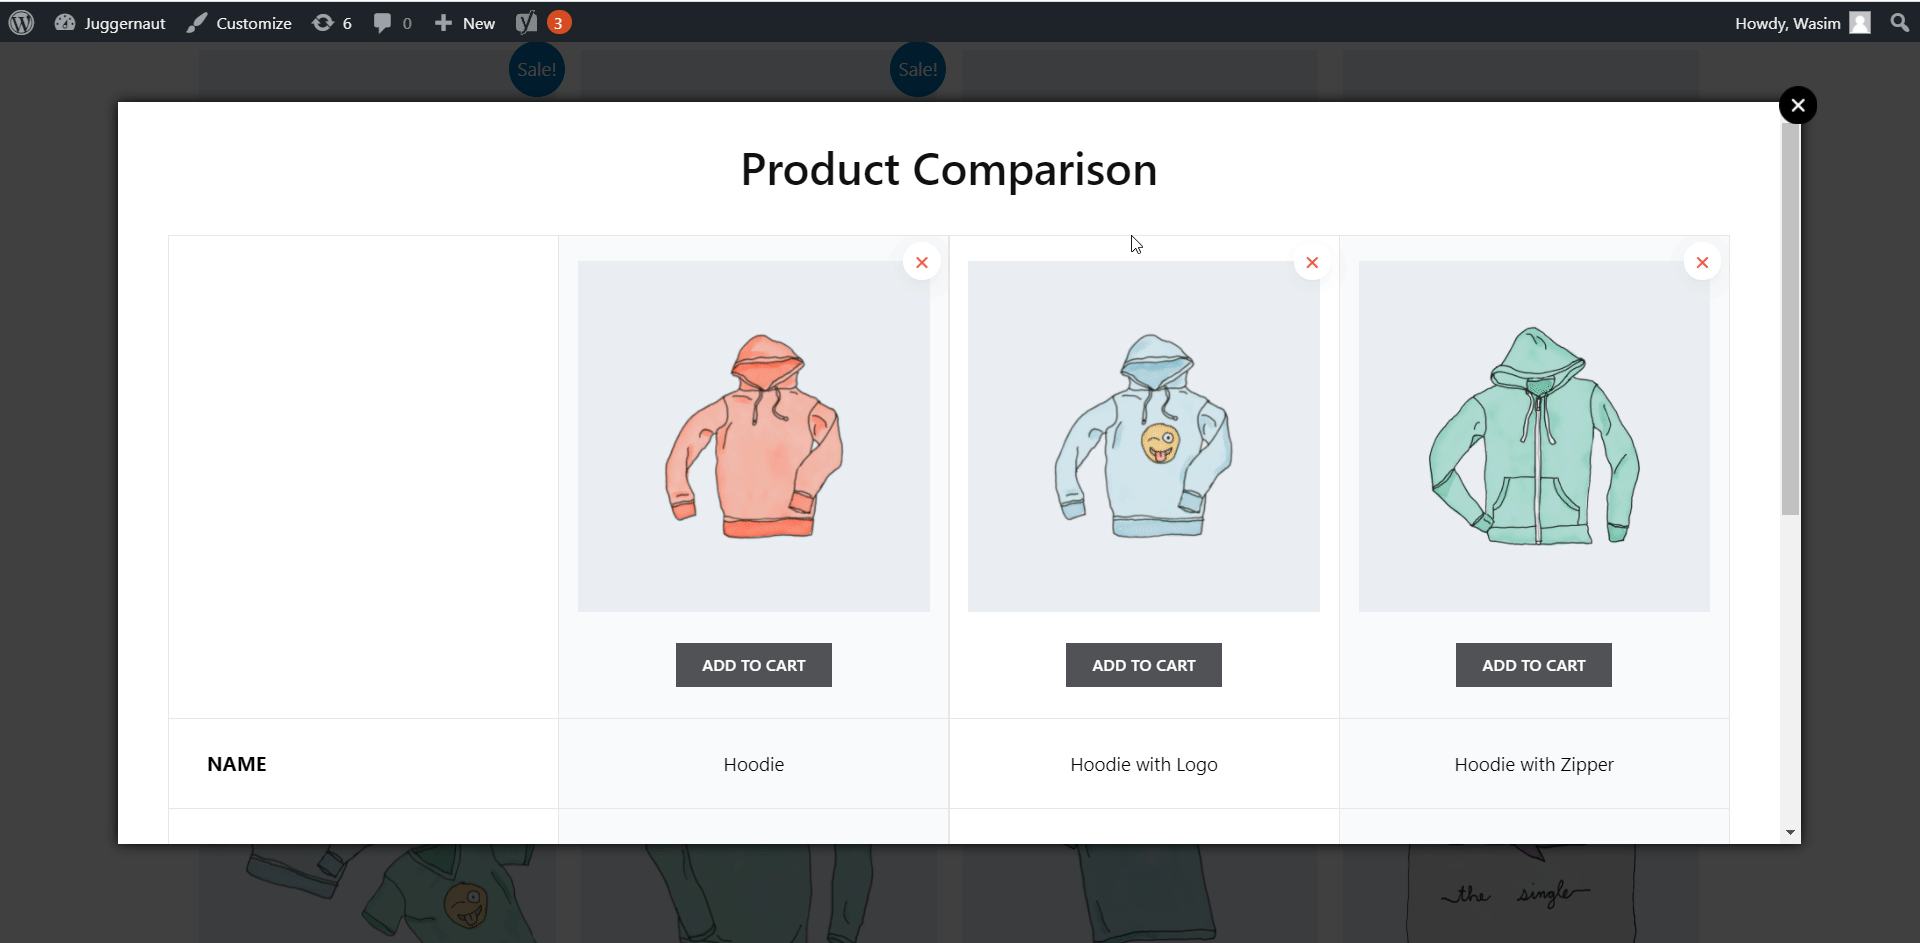 Similar products shows up on a pop-up window in shop page